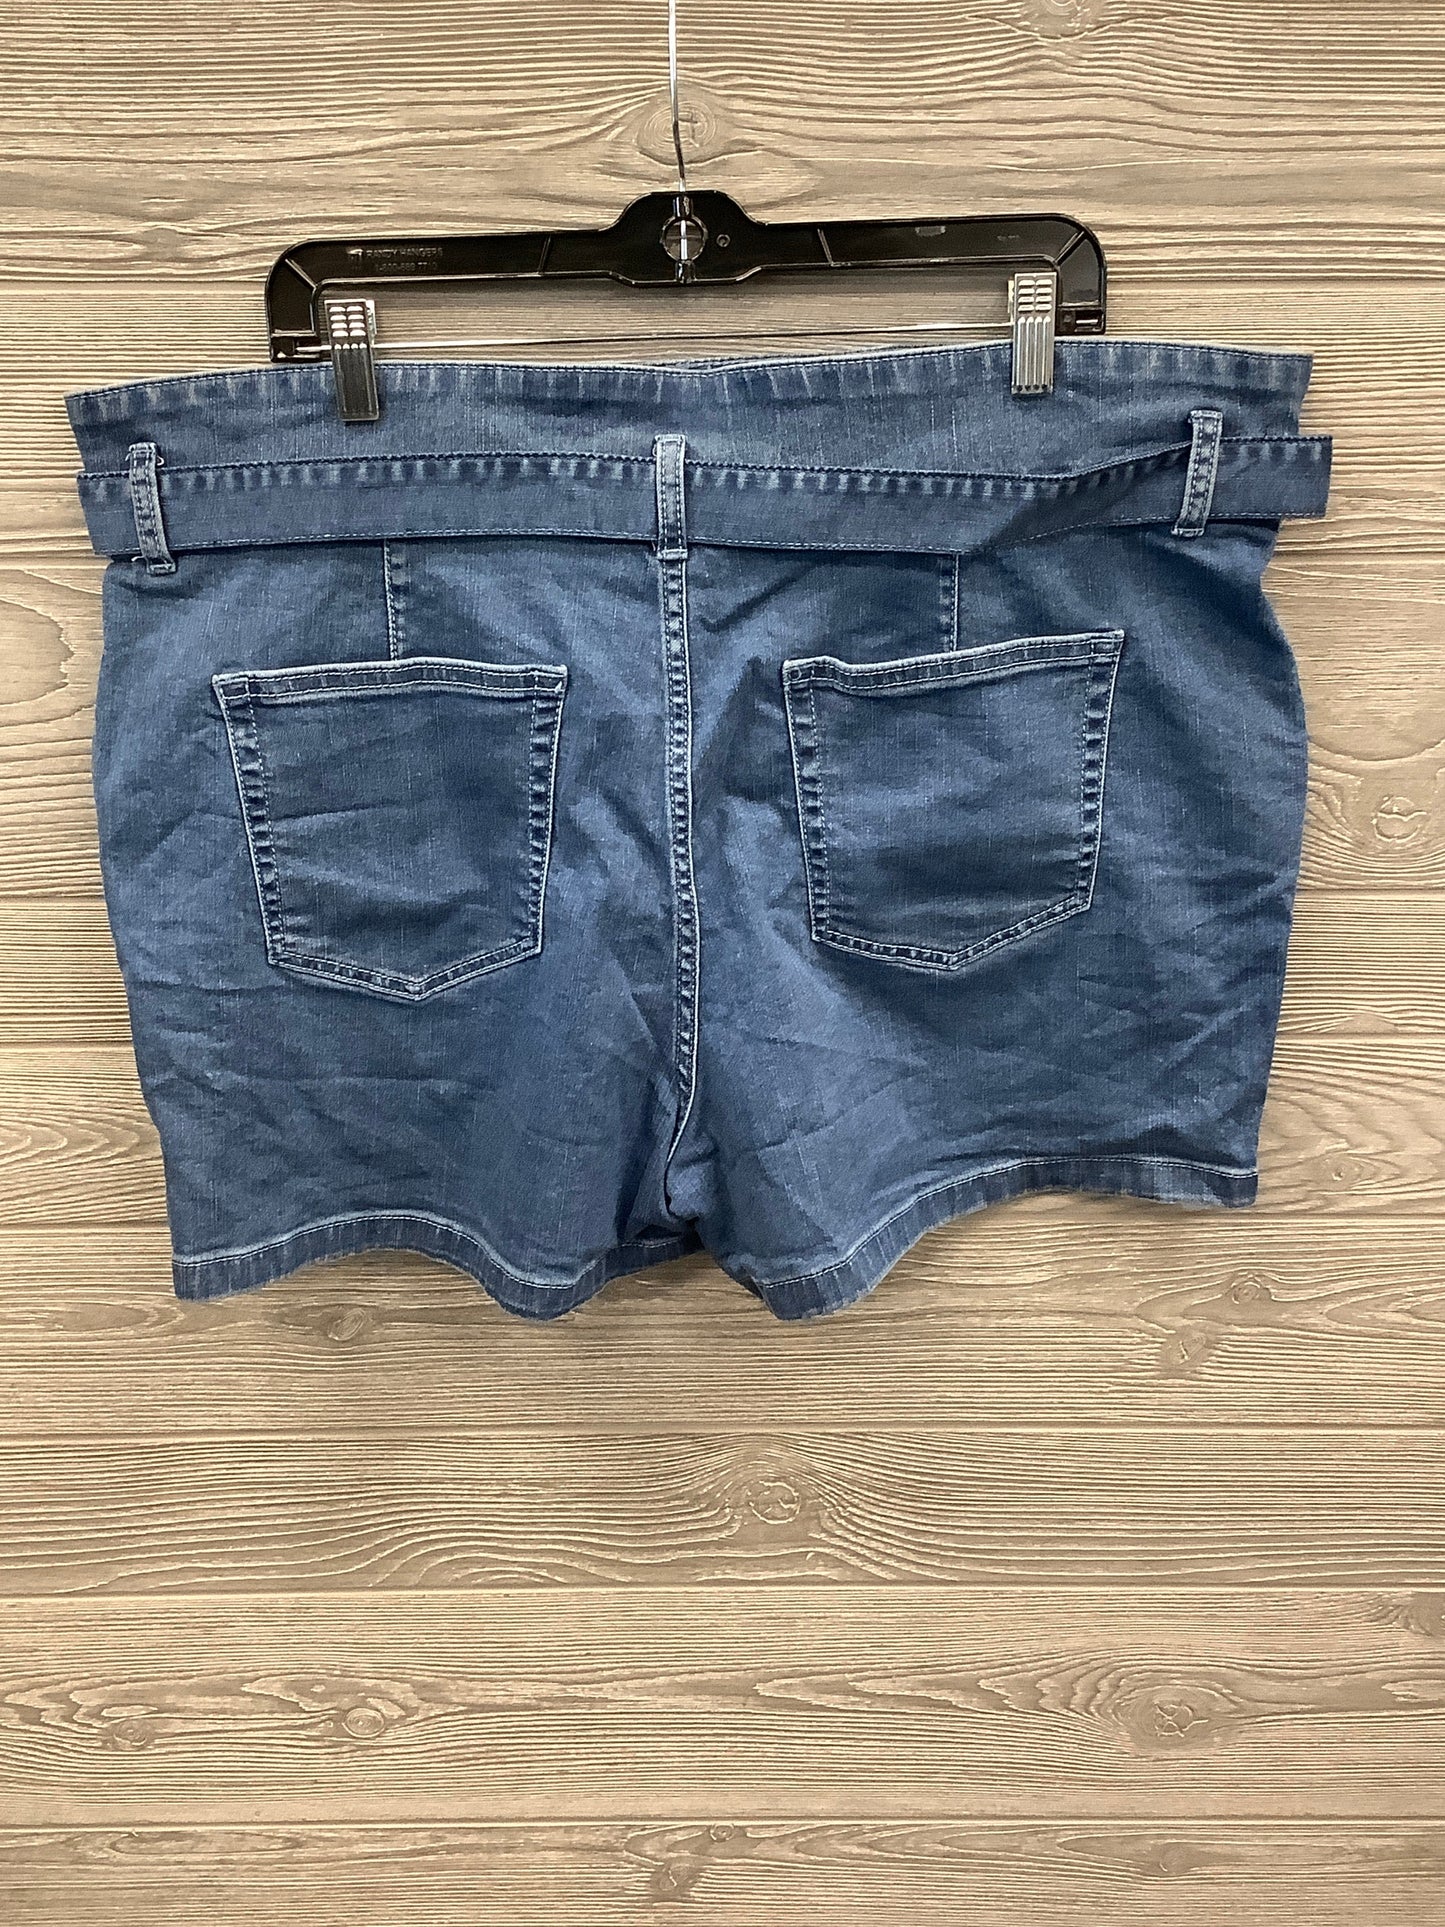 Shorts By Ana  Size: 18